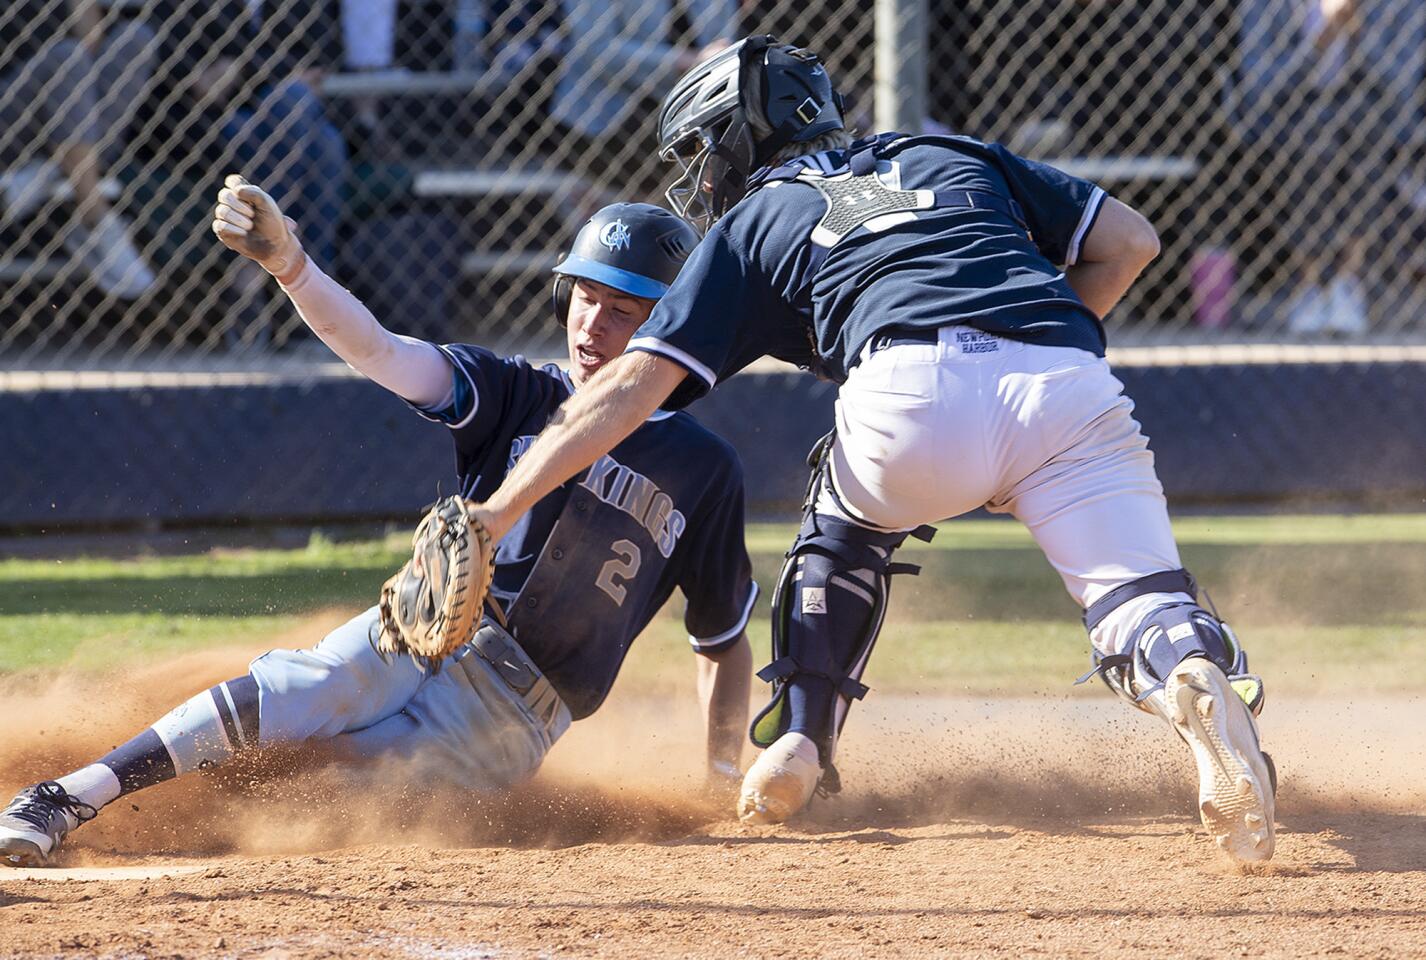 Newport Harbor's Clay Liolios makes the tag on Corona del Mar's Matthew Decrona who is called out at the plate during a Wave League game on Tuesday, April 16.